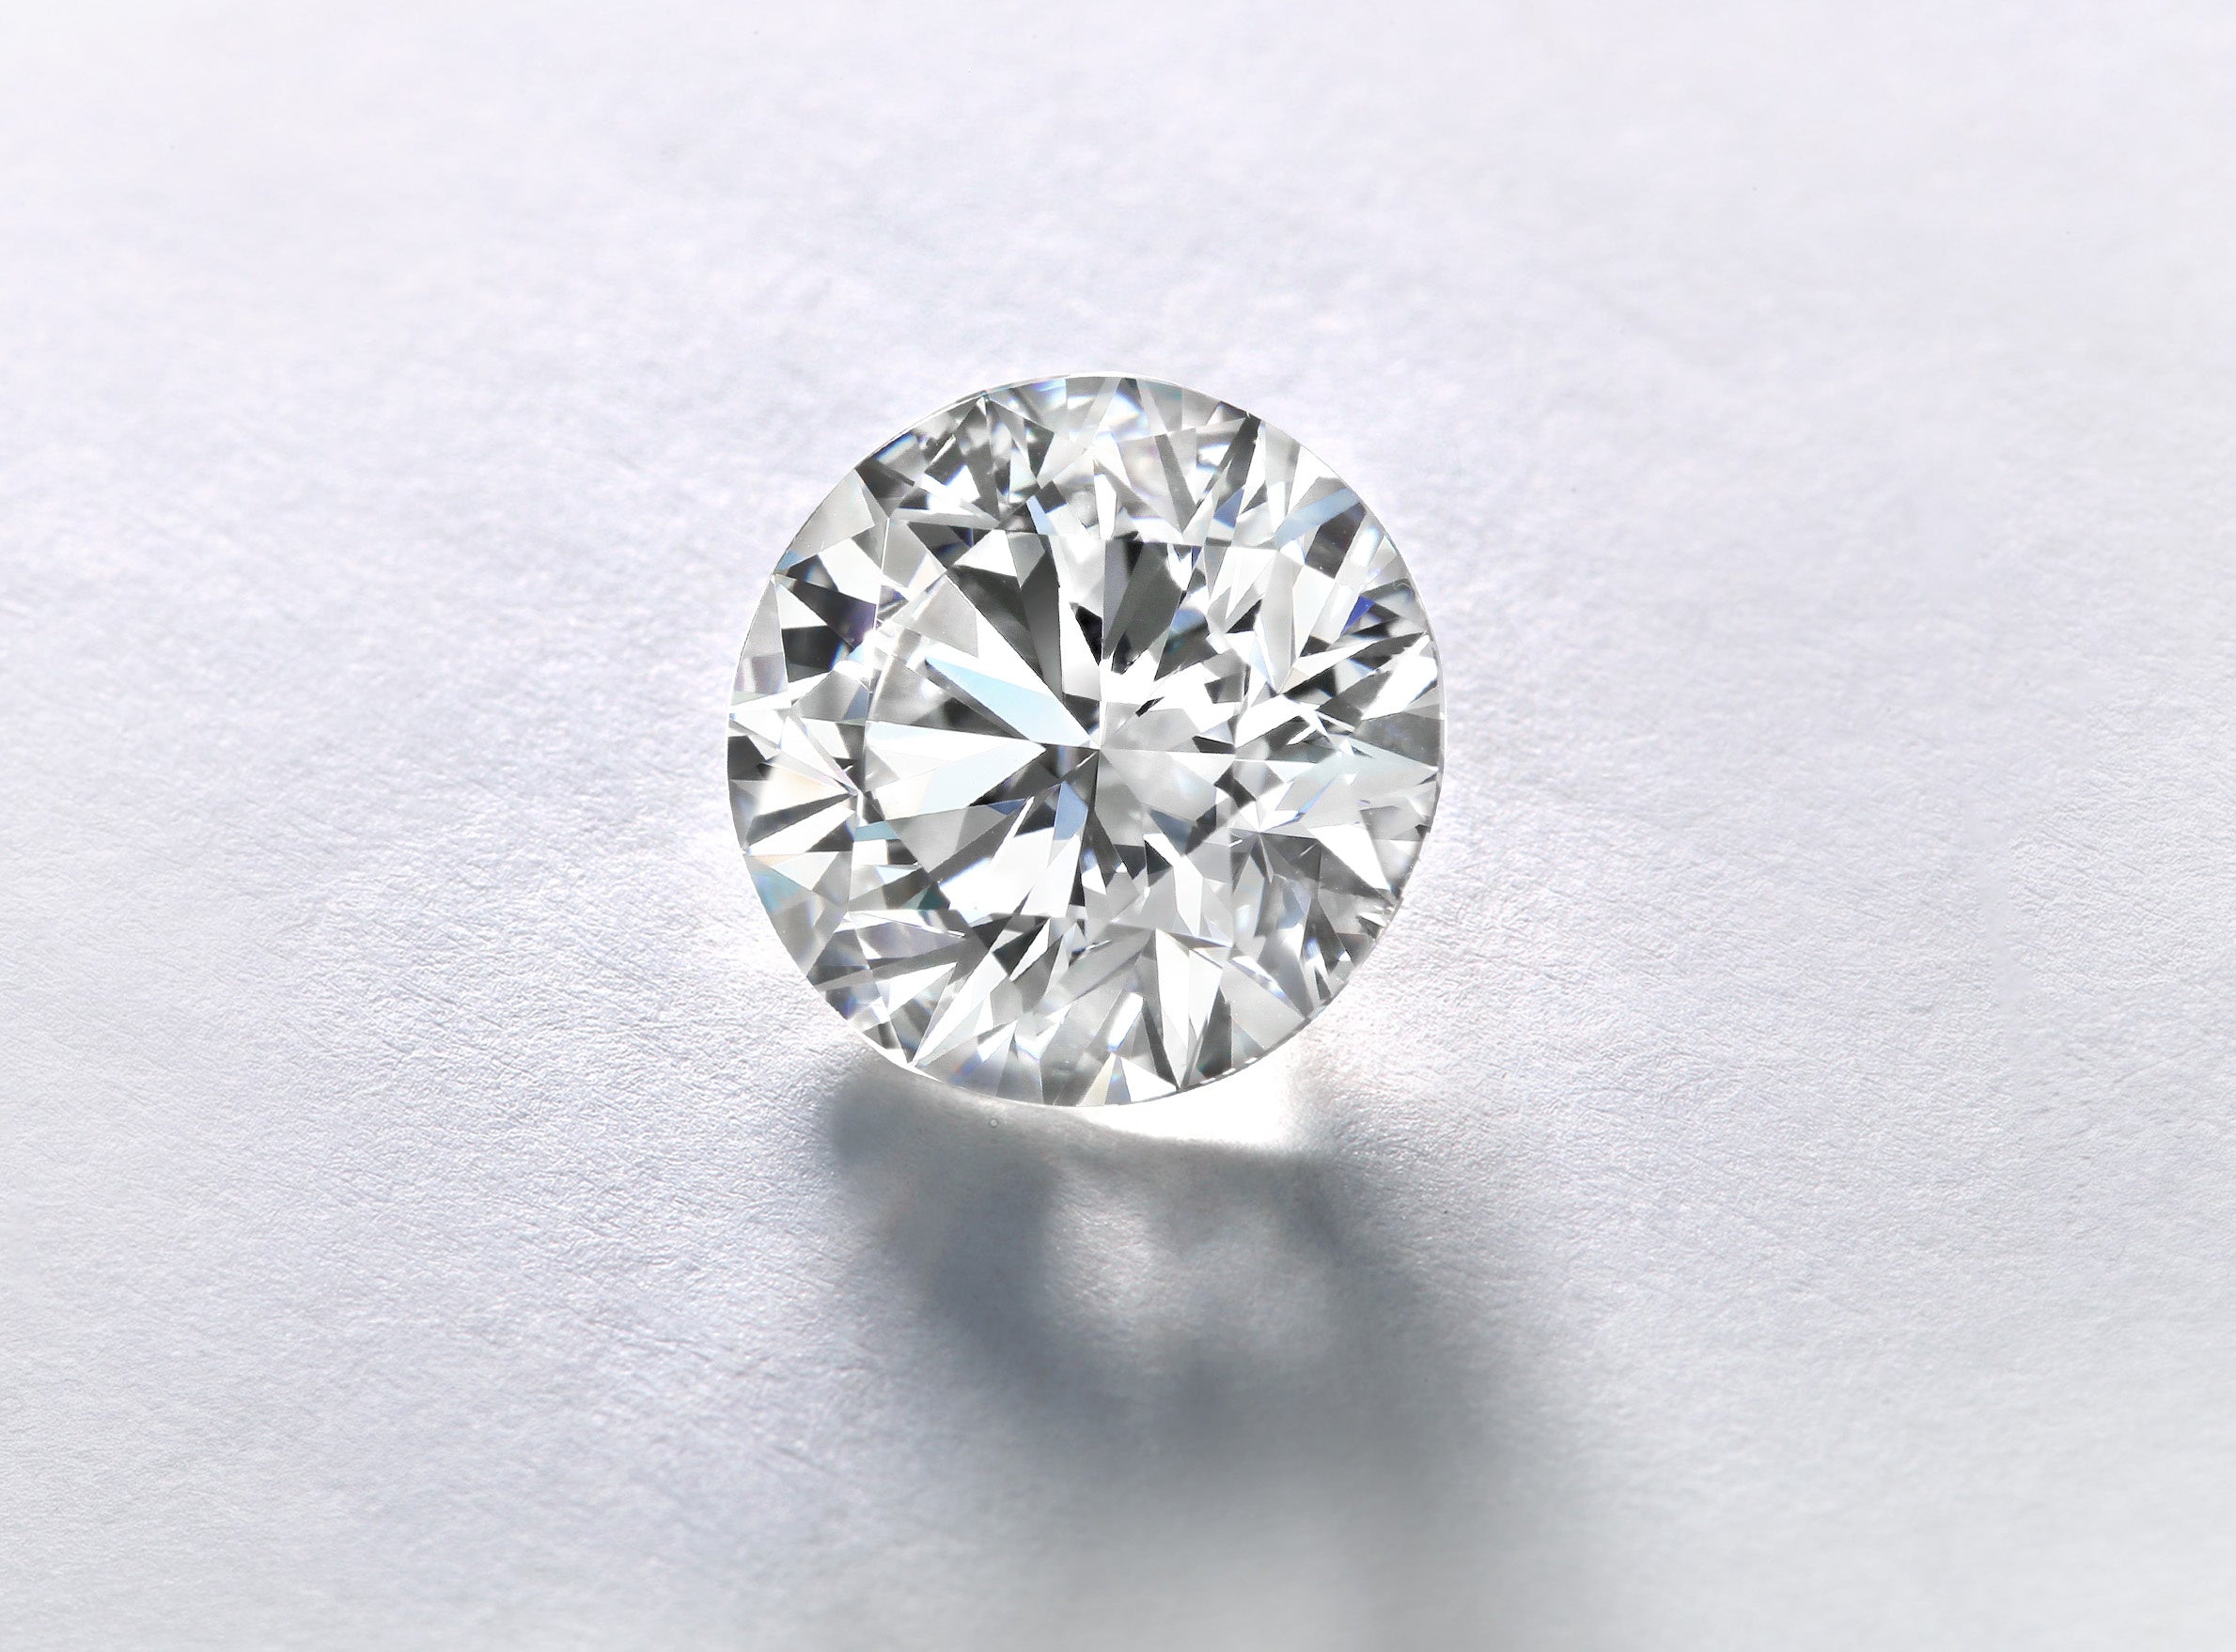 0.28ct Dcolor IF